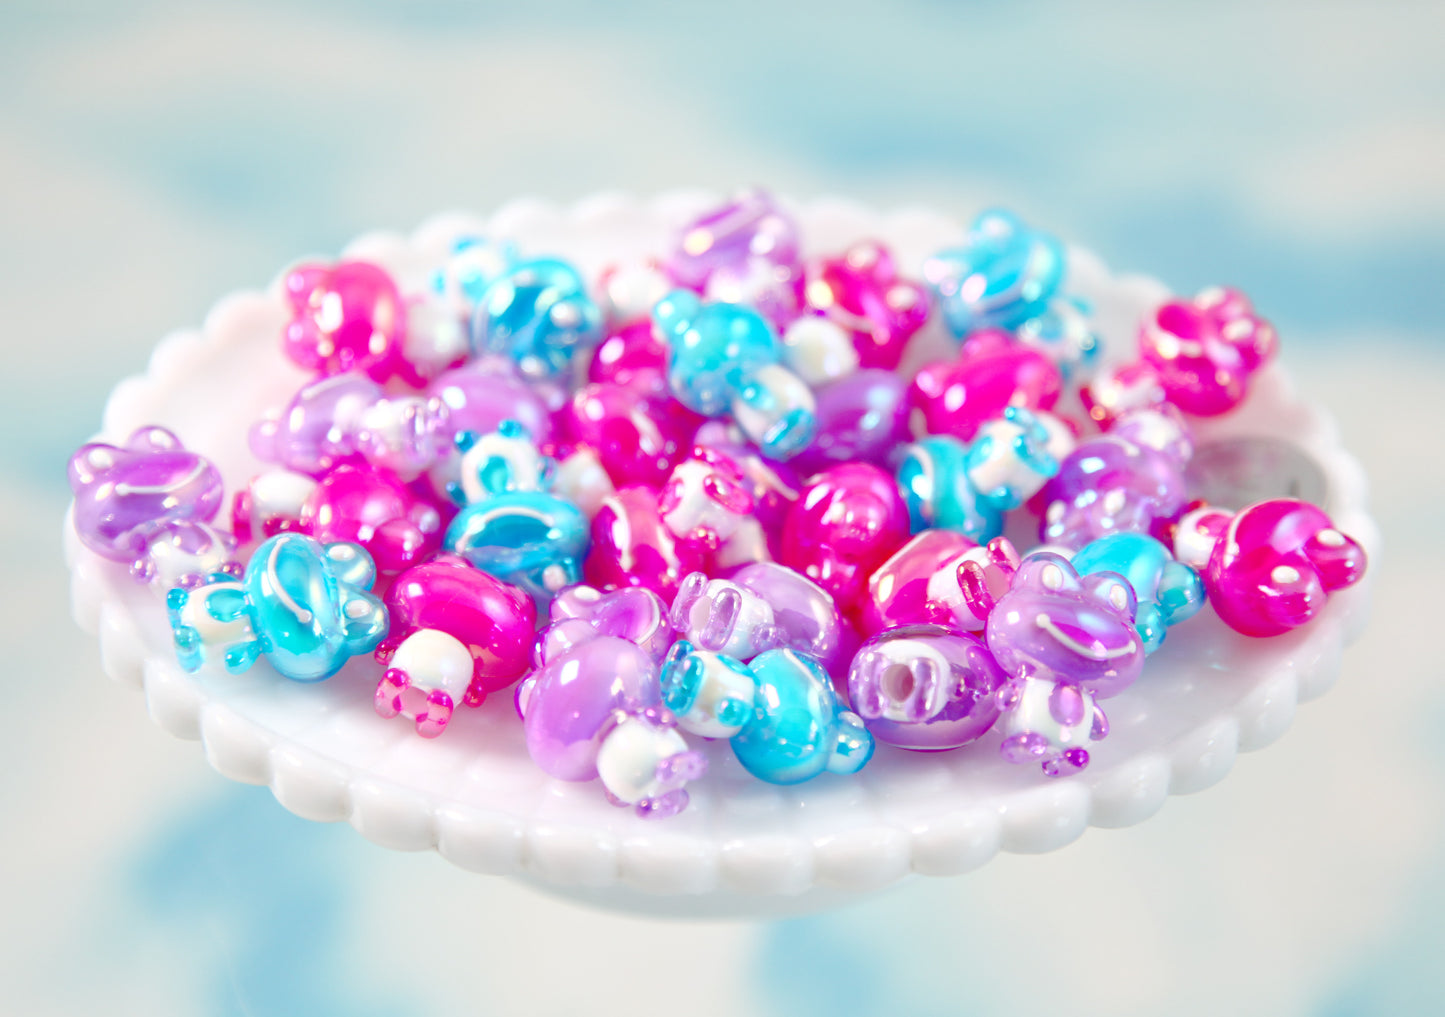 Cute Frog Beads - 22mm AB Frog Colorful Bead Chunky Acrylic or Plastic Beads - 9 pc set